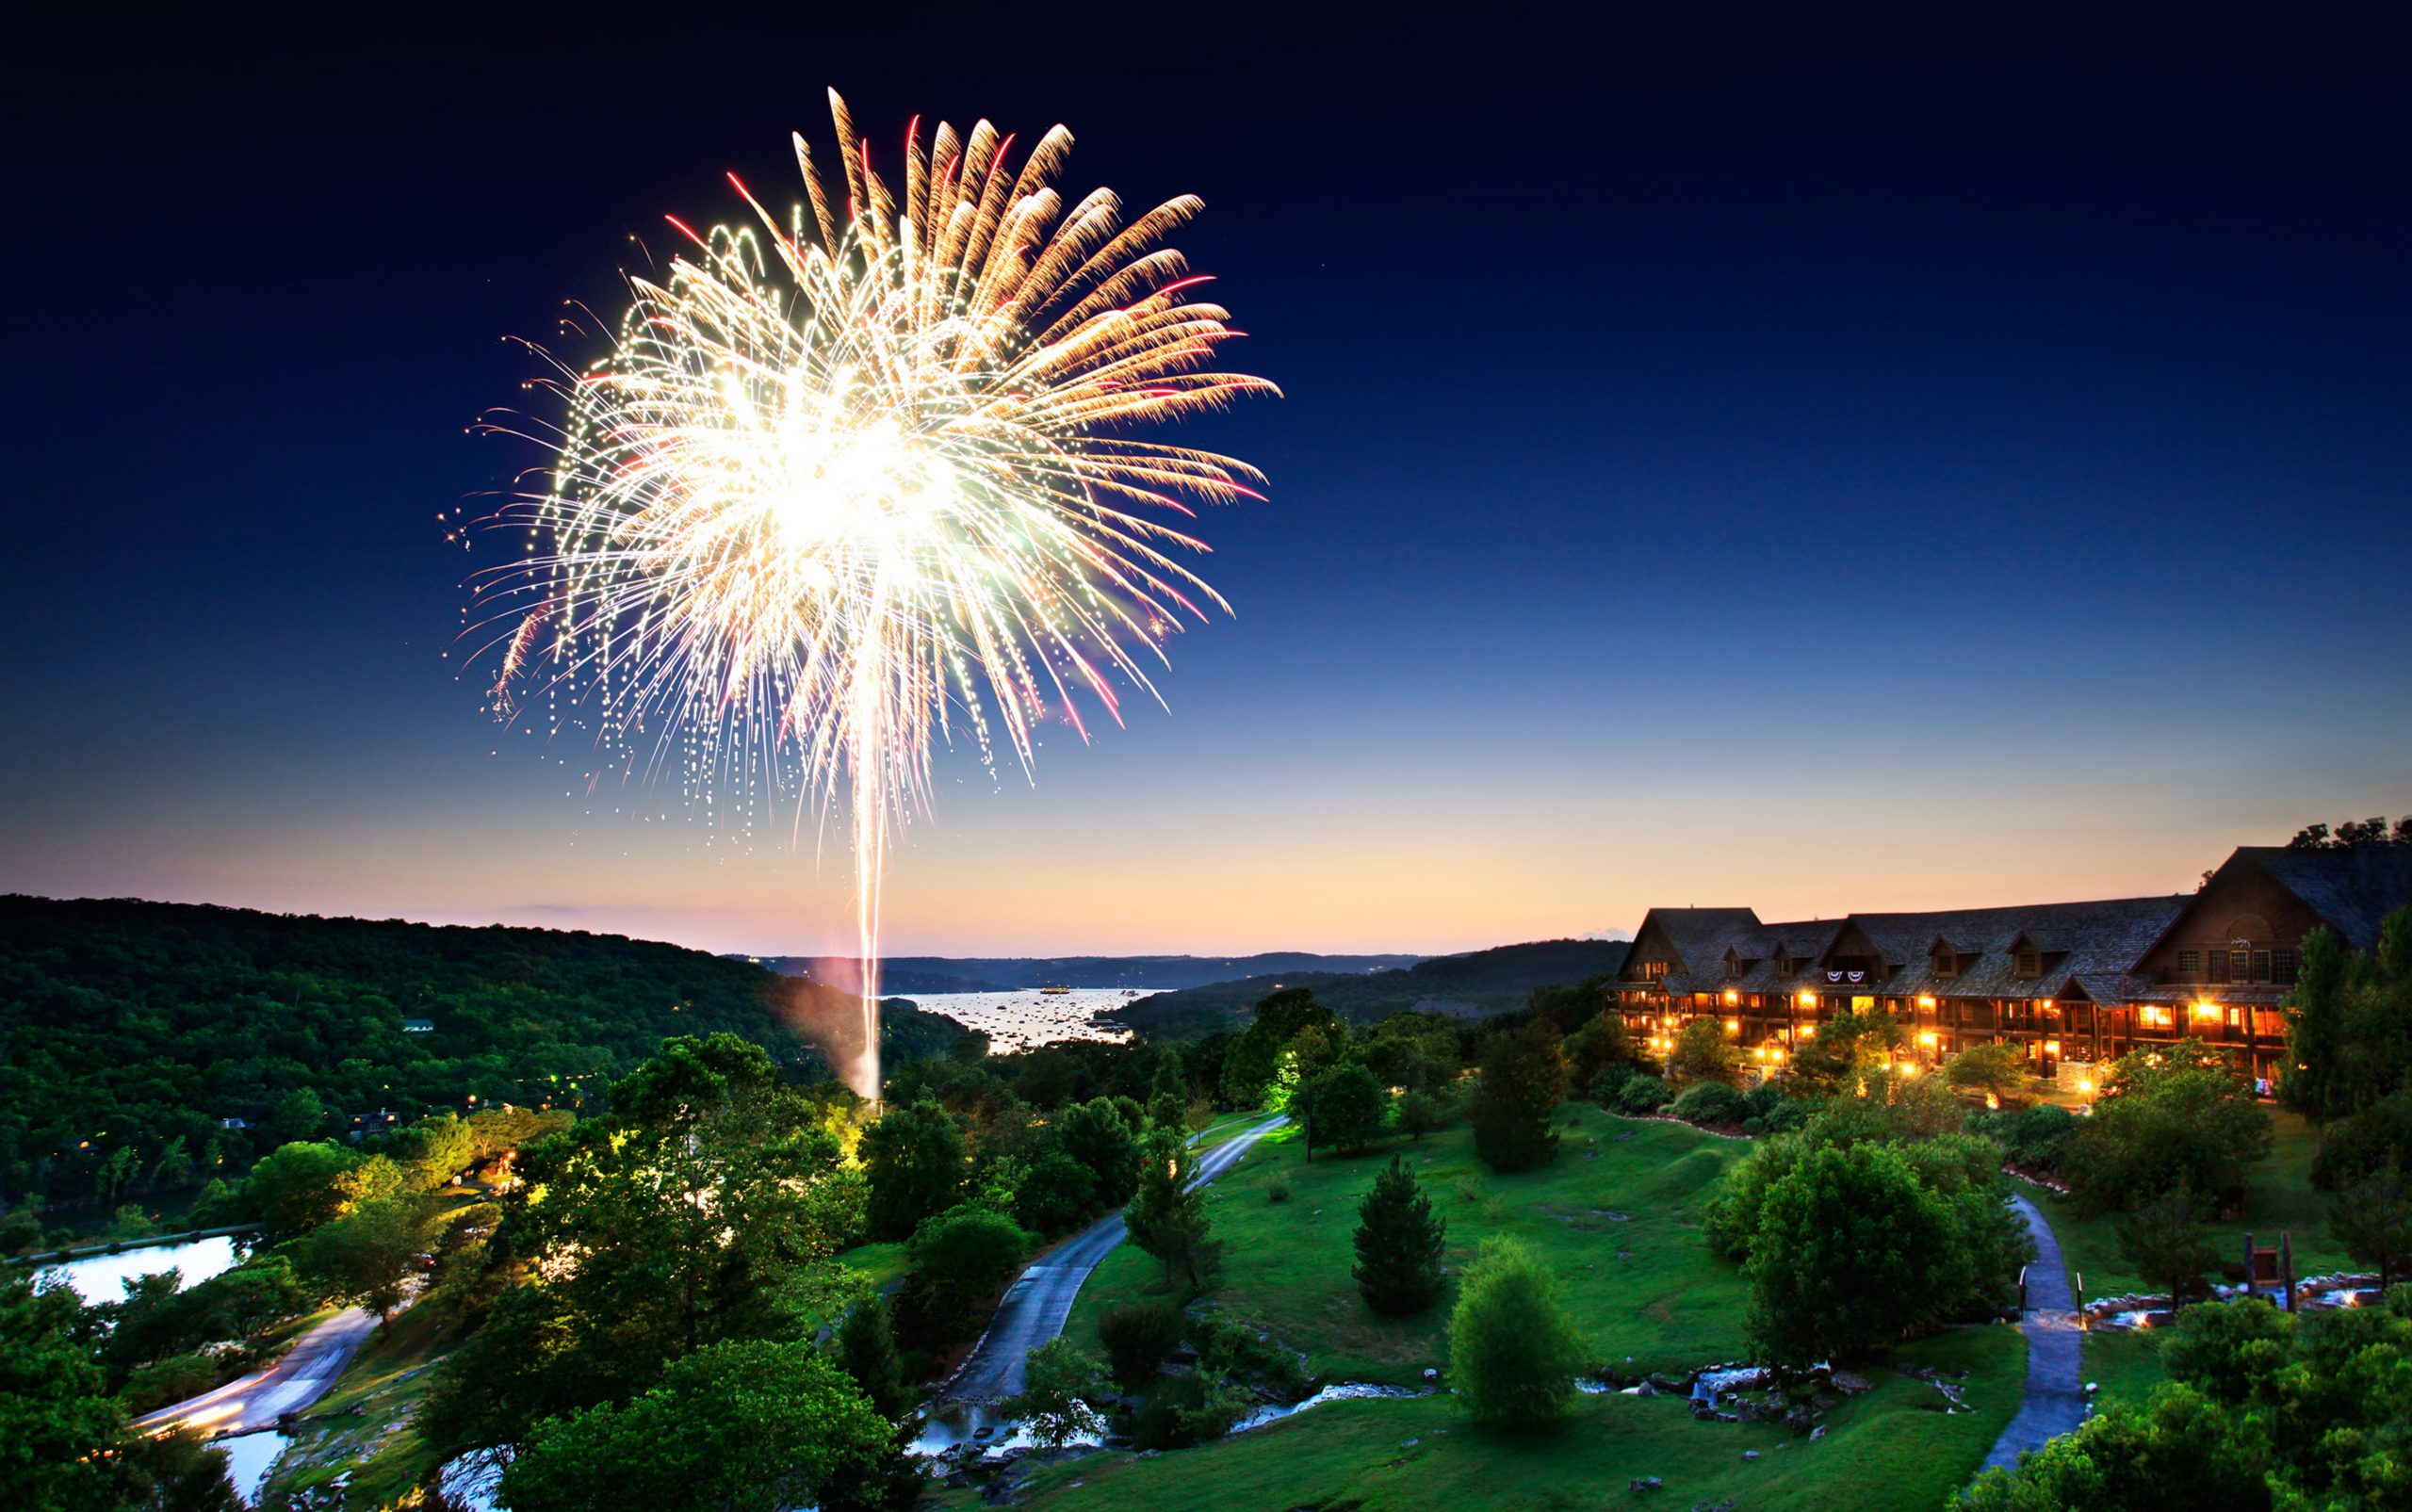 6-Overlooking-Valley-View-Lodge-Lake-and-Fireworks-150x150.jpg